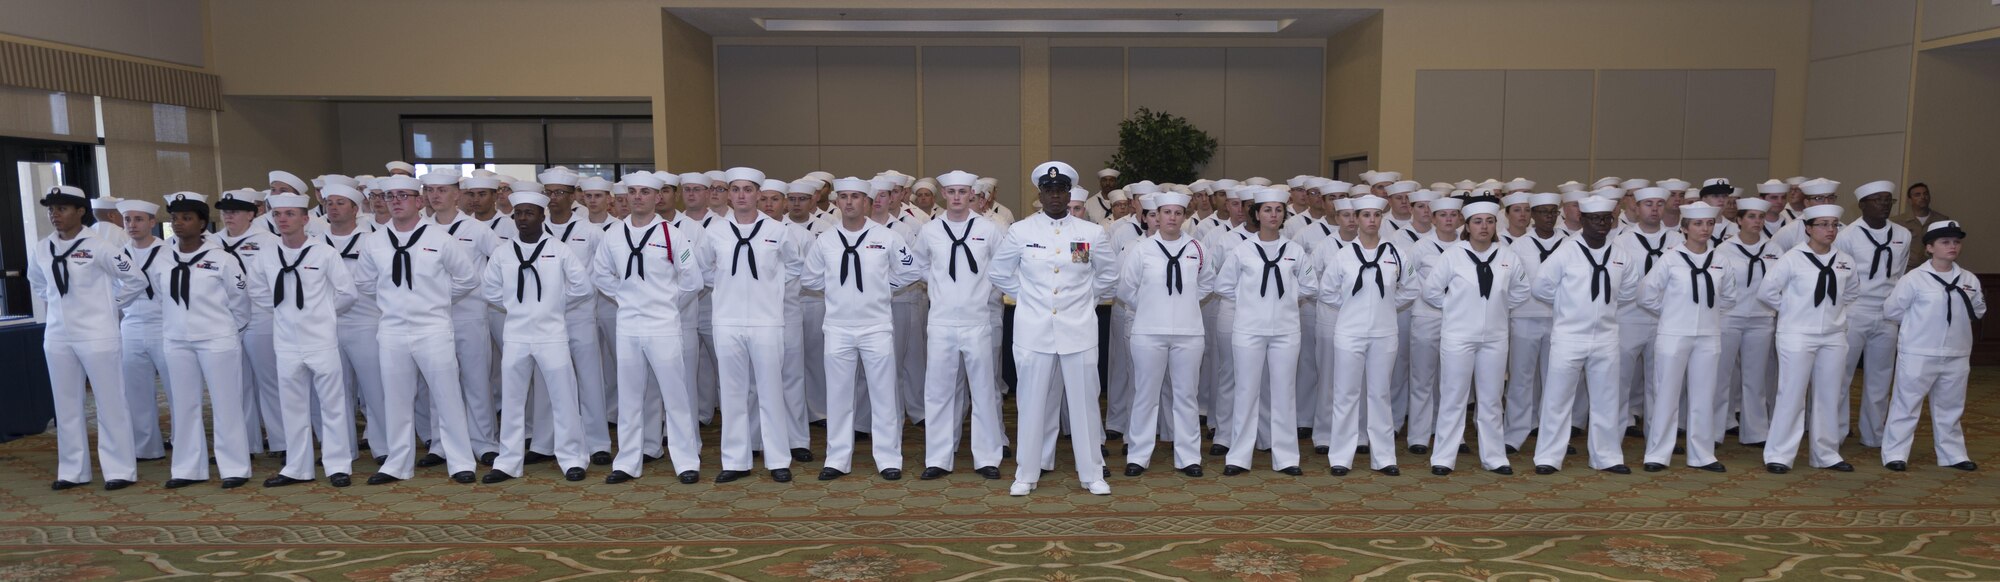 Center for Naval Aviation Technical Training Unit Keesler members stand in formation at the CNATTU Keesler change of command ceremony at the Bay Breeze Event Center Oct. 20, 2016, on Keesler Air Force Base, Miss. CNATTU Keesler is a training unit of the Center for Naval Aviation Technical Training located at Naval Air Station Pensacola, Fla. CNATT develops, delivers, and supports aviation technical training at 27 sites located throughout the continental U.S. and Japan. (U.S. Air Force photo by Andre’ Askew/Released) 